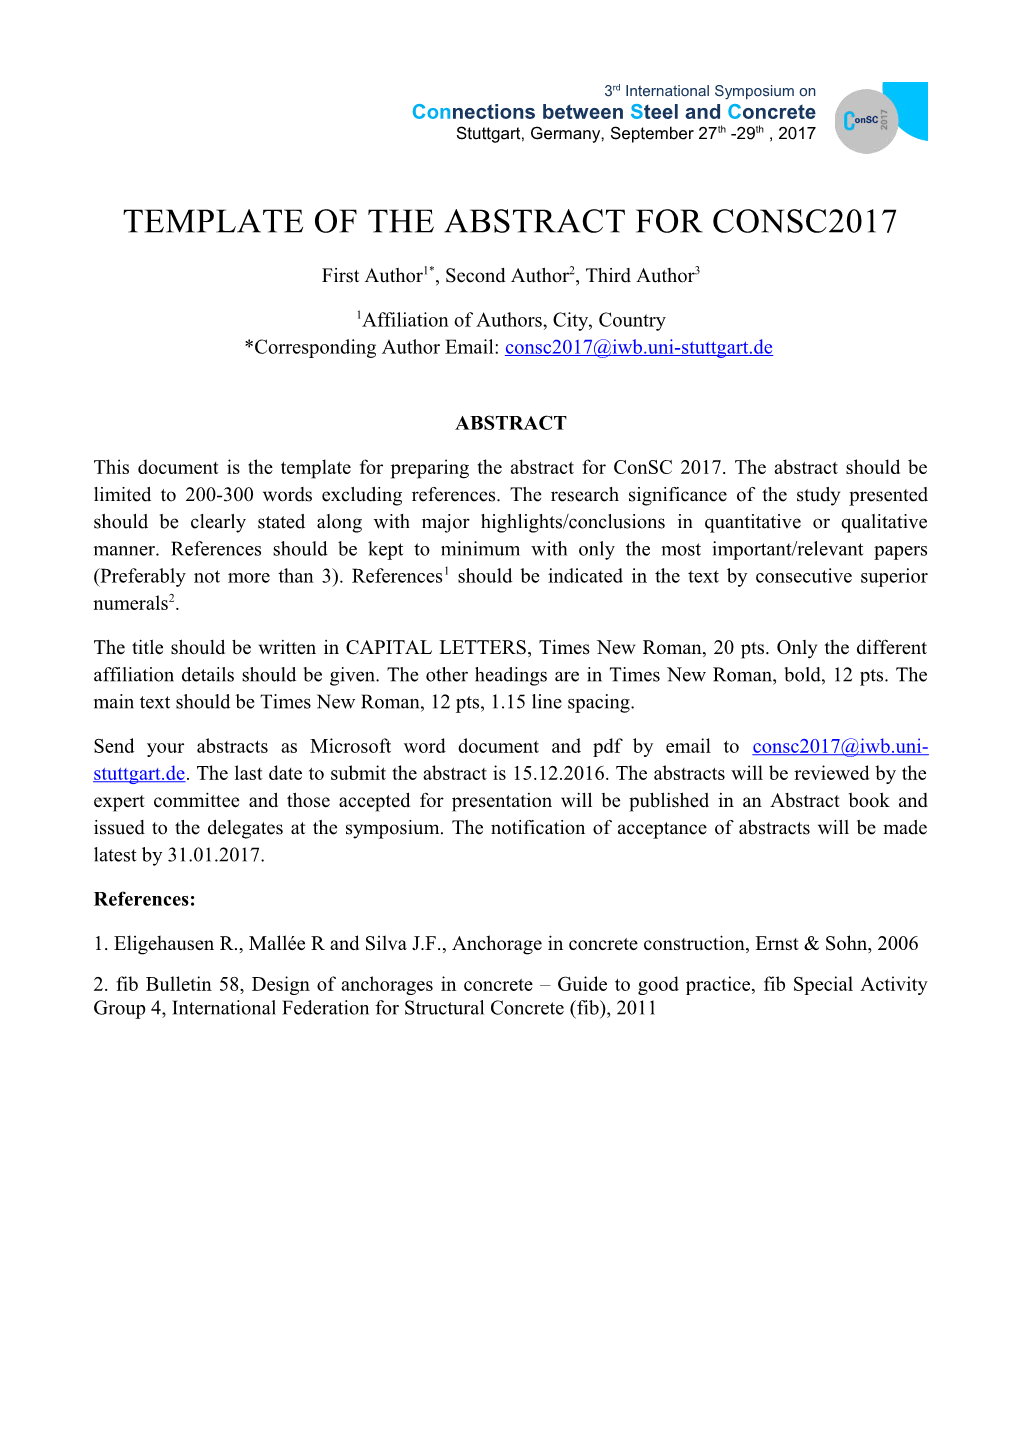 Template of the Abstract for Consc2017